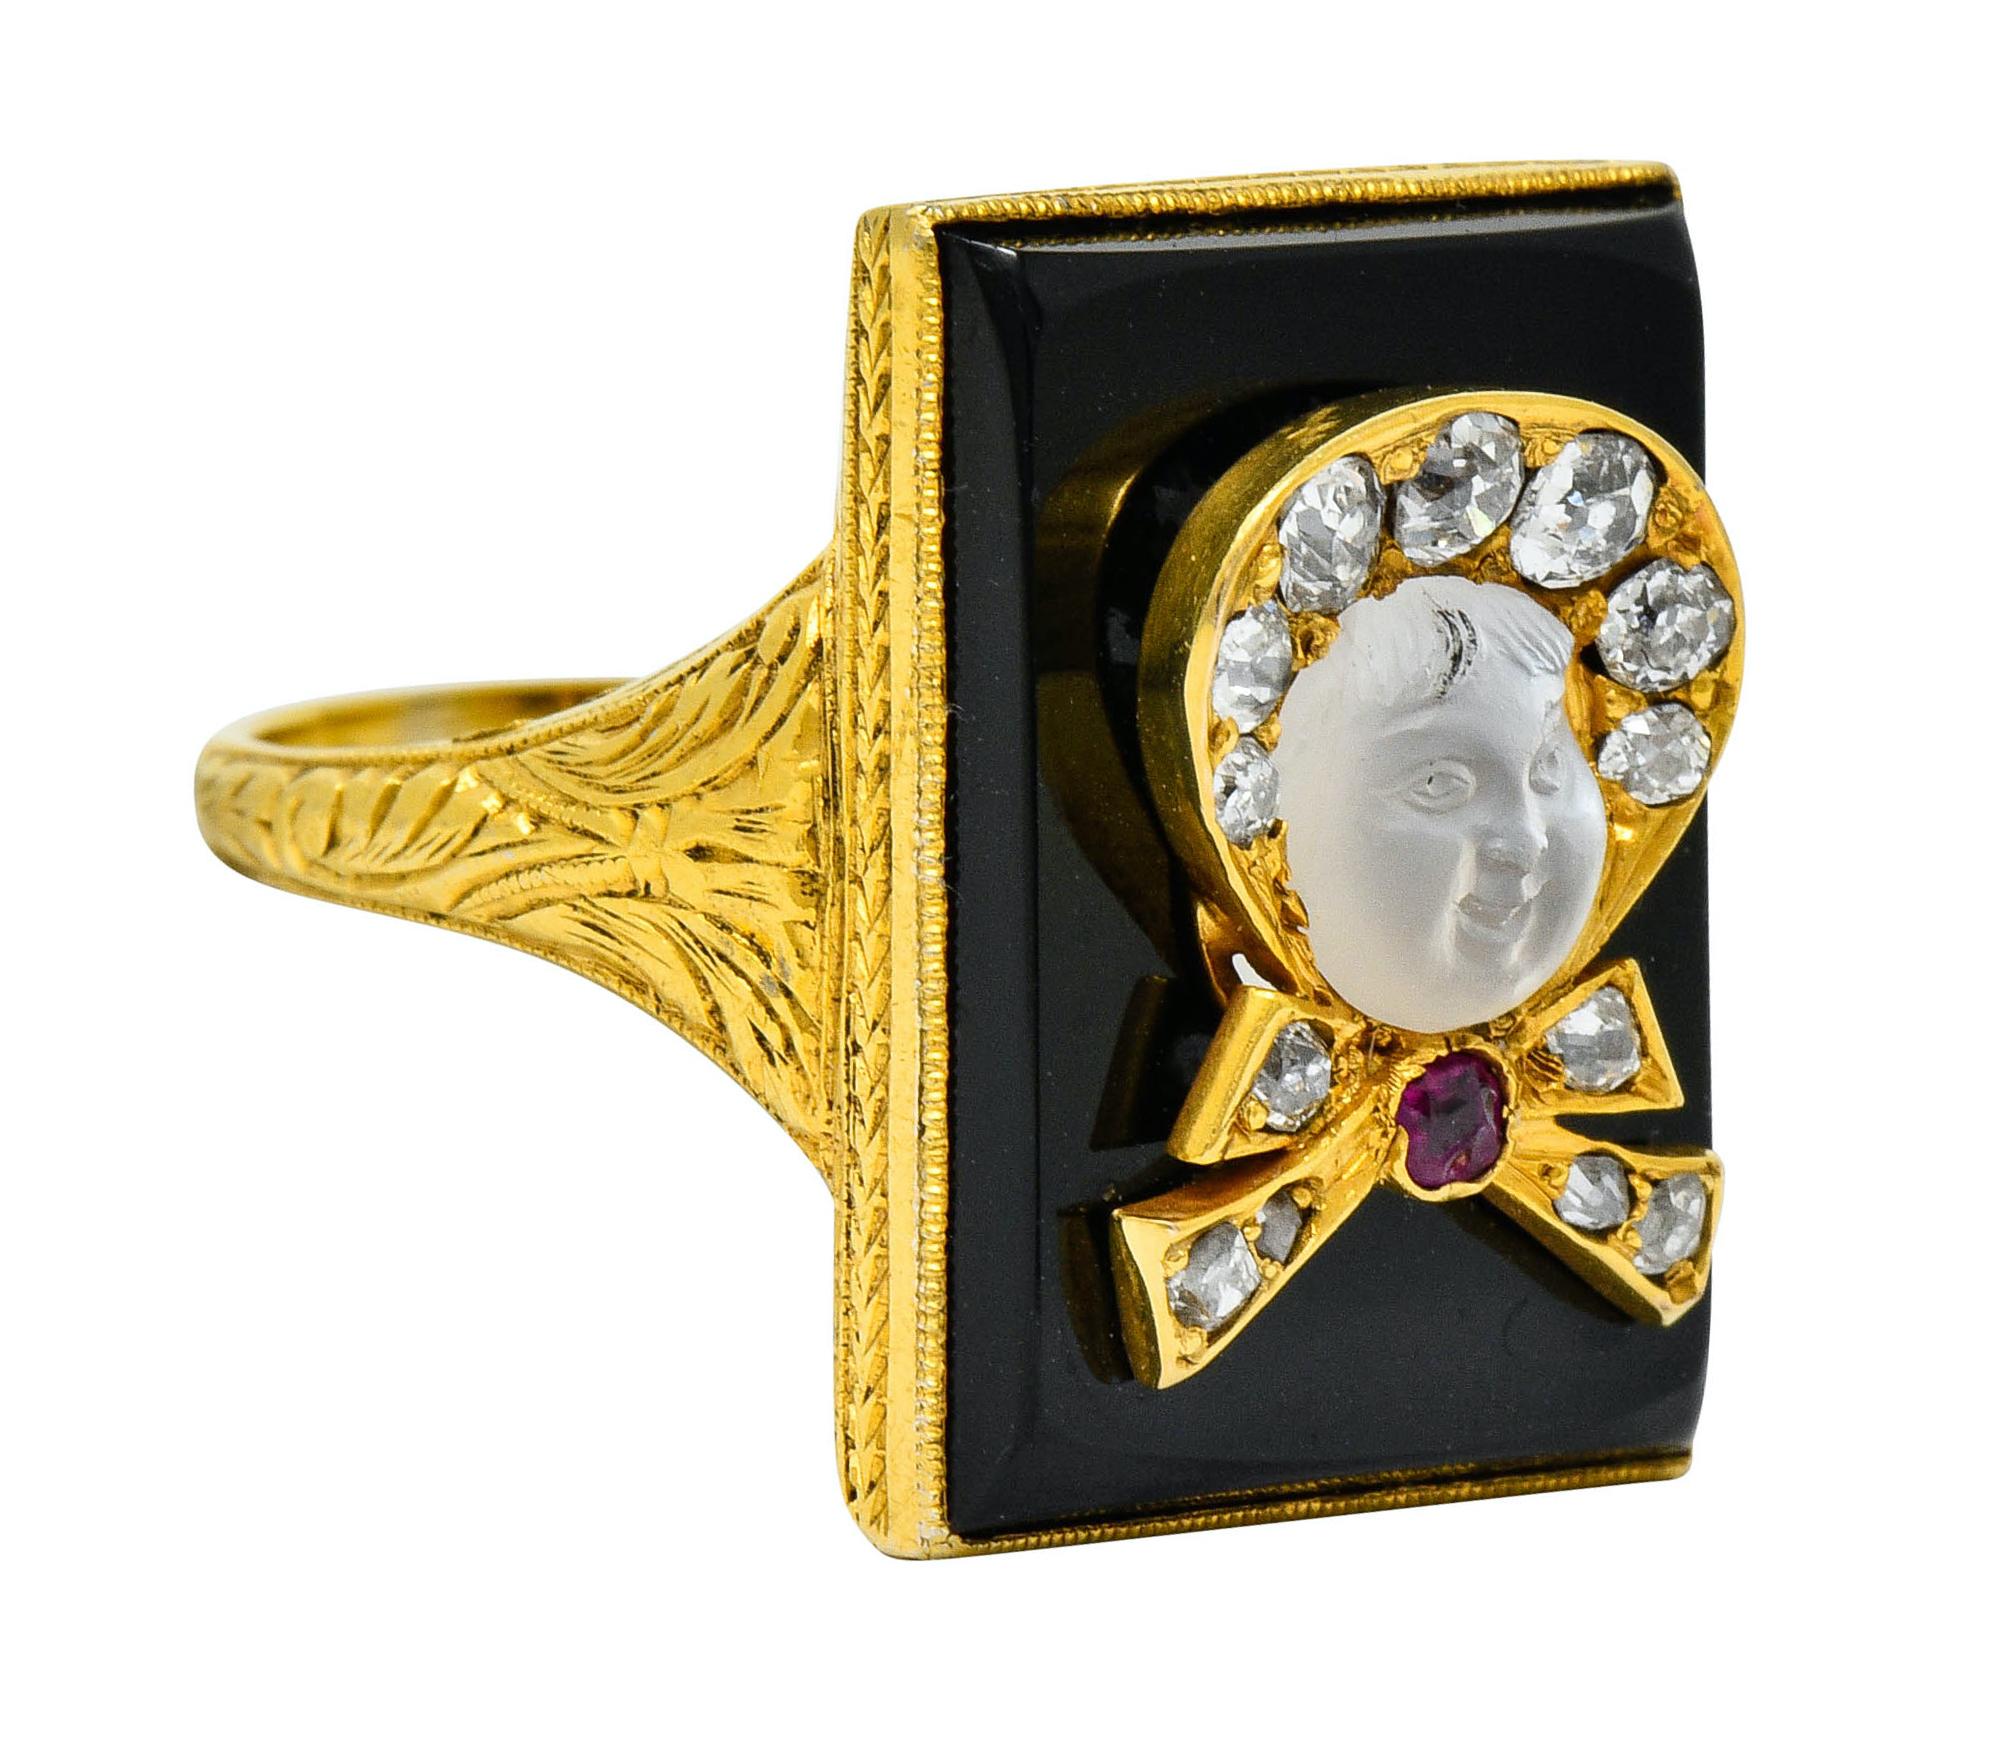 Rectangular statement ring designed as an ornately engraved mounting featuring a bezel set tablet of onyx with excellent polish

Centering a dimensional depiction of a baby in a bowed bonnet accented by a cushion cut ruby

Face is a deeply carved